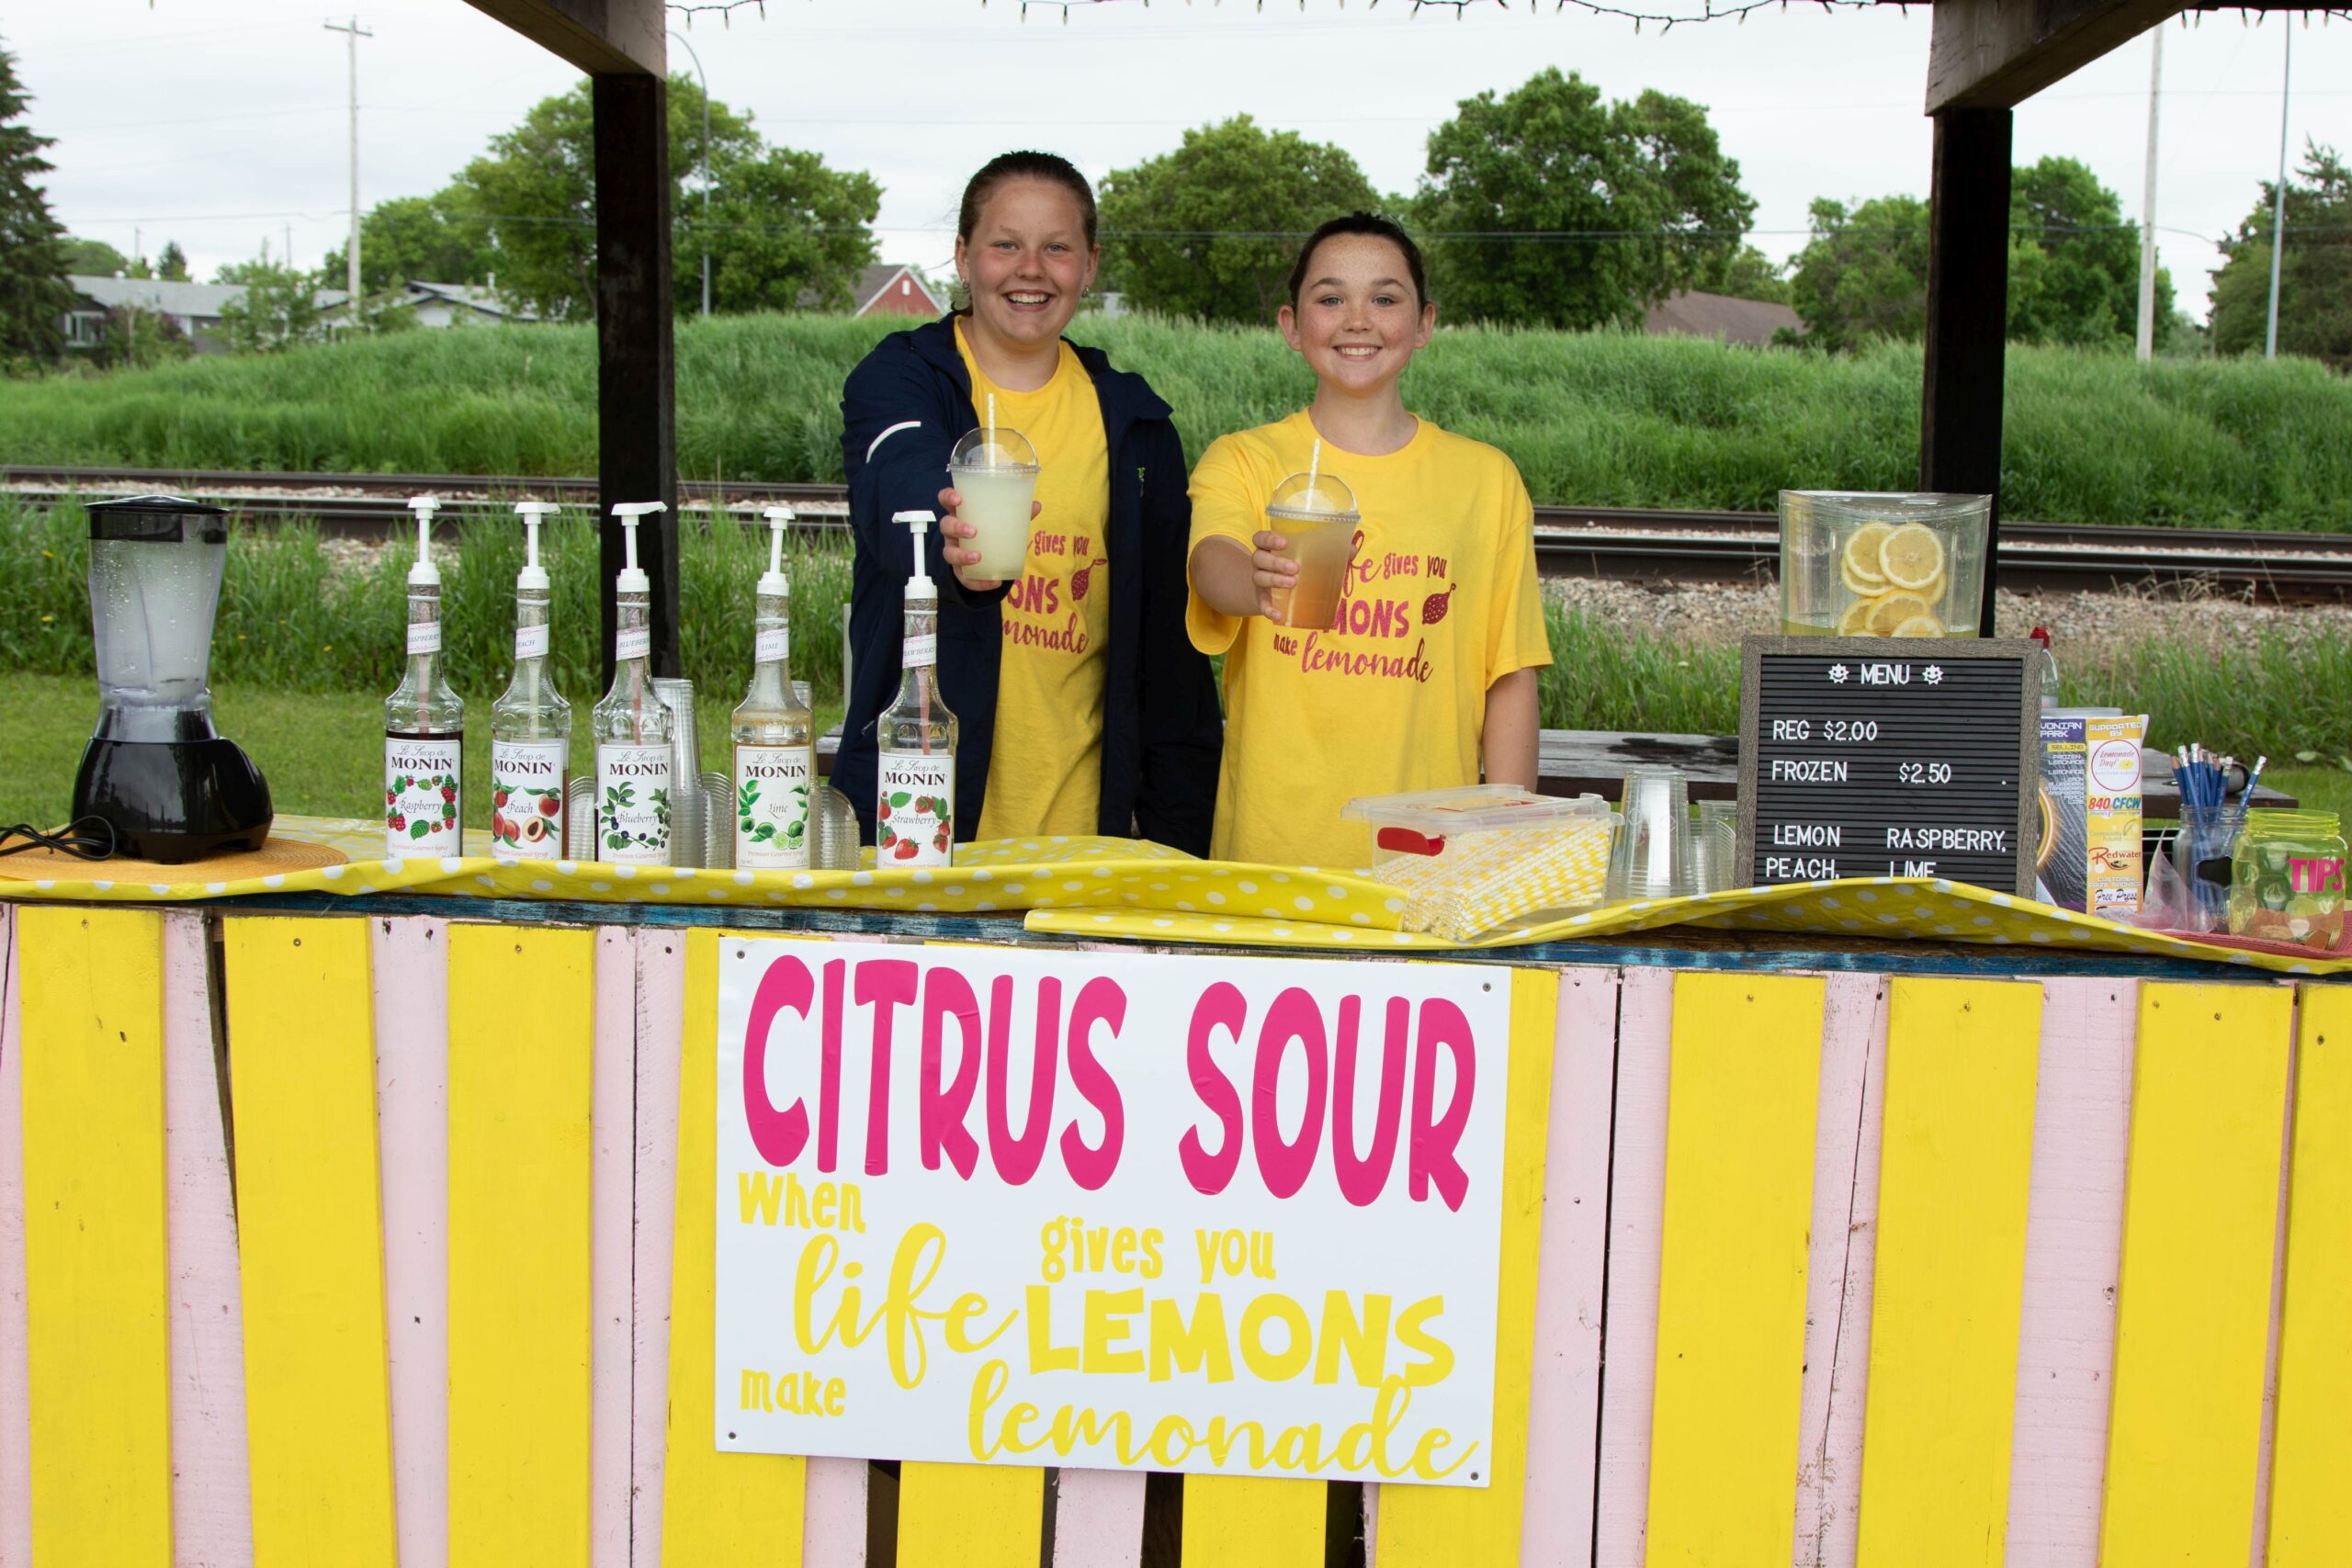 Teaching kids about being an entrepreneur with the help of some lemonade